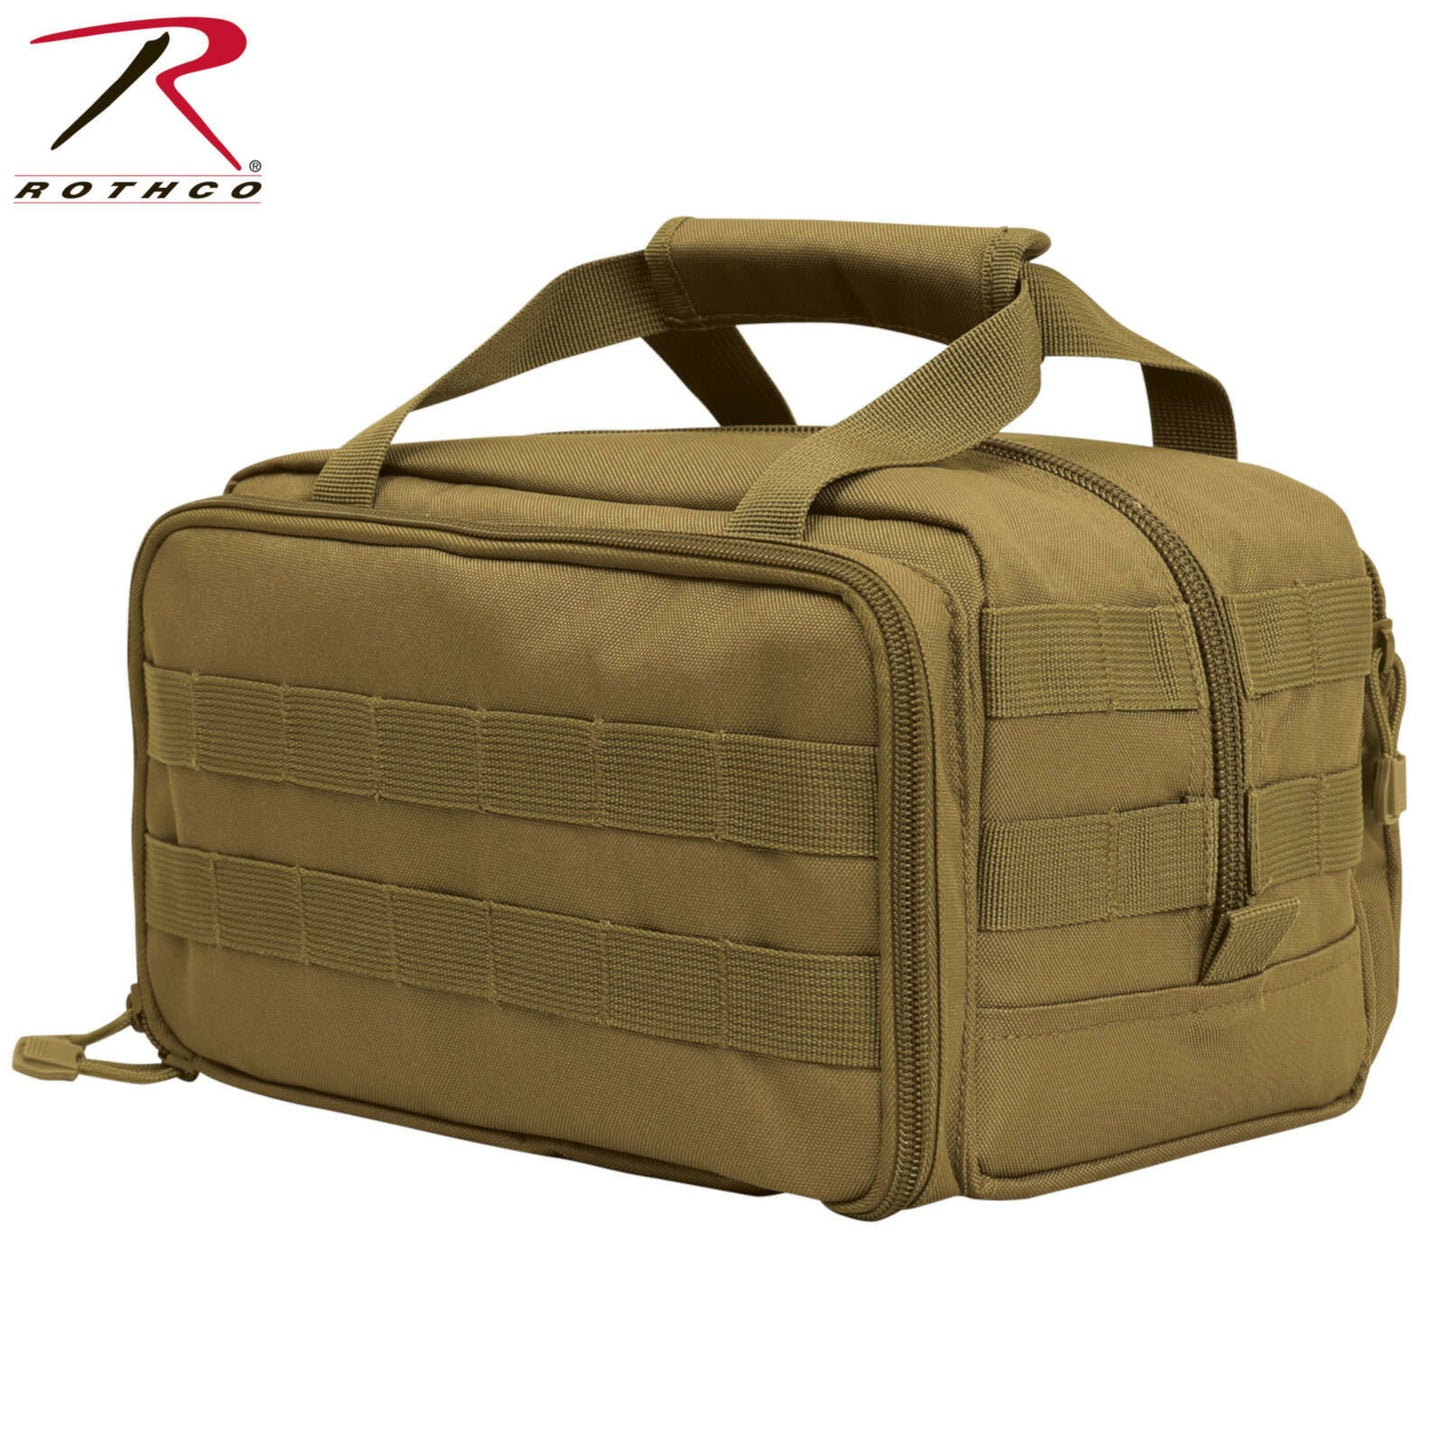 Rothco Tactical Tool Bag In Coyote Brown - Heavyweight Polyester Construction